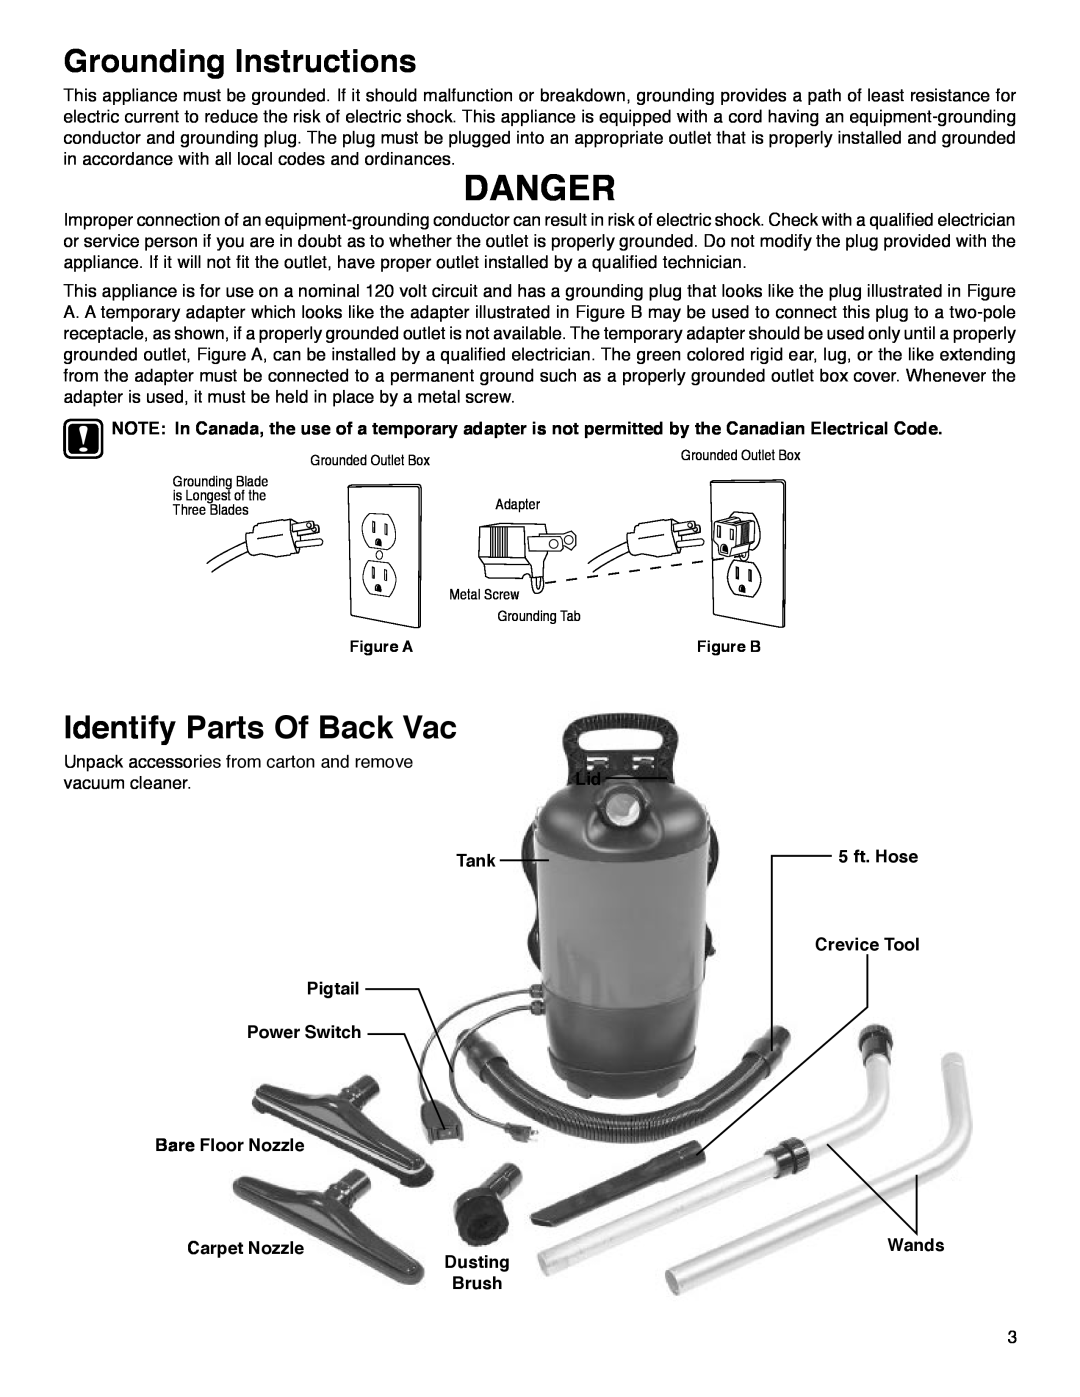 Electrolux SC412 Grounding Instructions, Identify Parts Of Back Vac, Pigtail Power Switch Bare Floor Nozzle Carpet Nozzle 